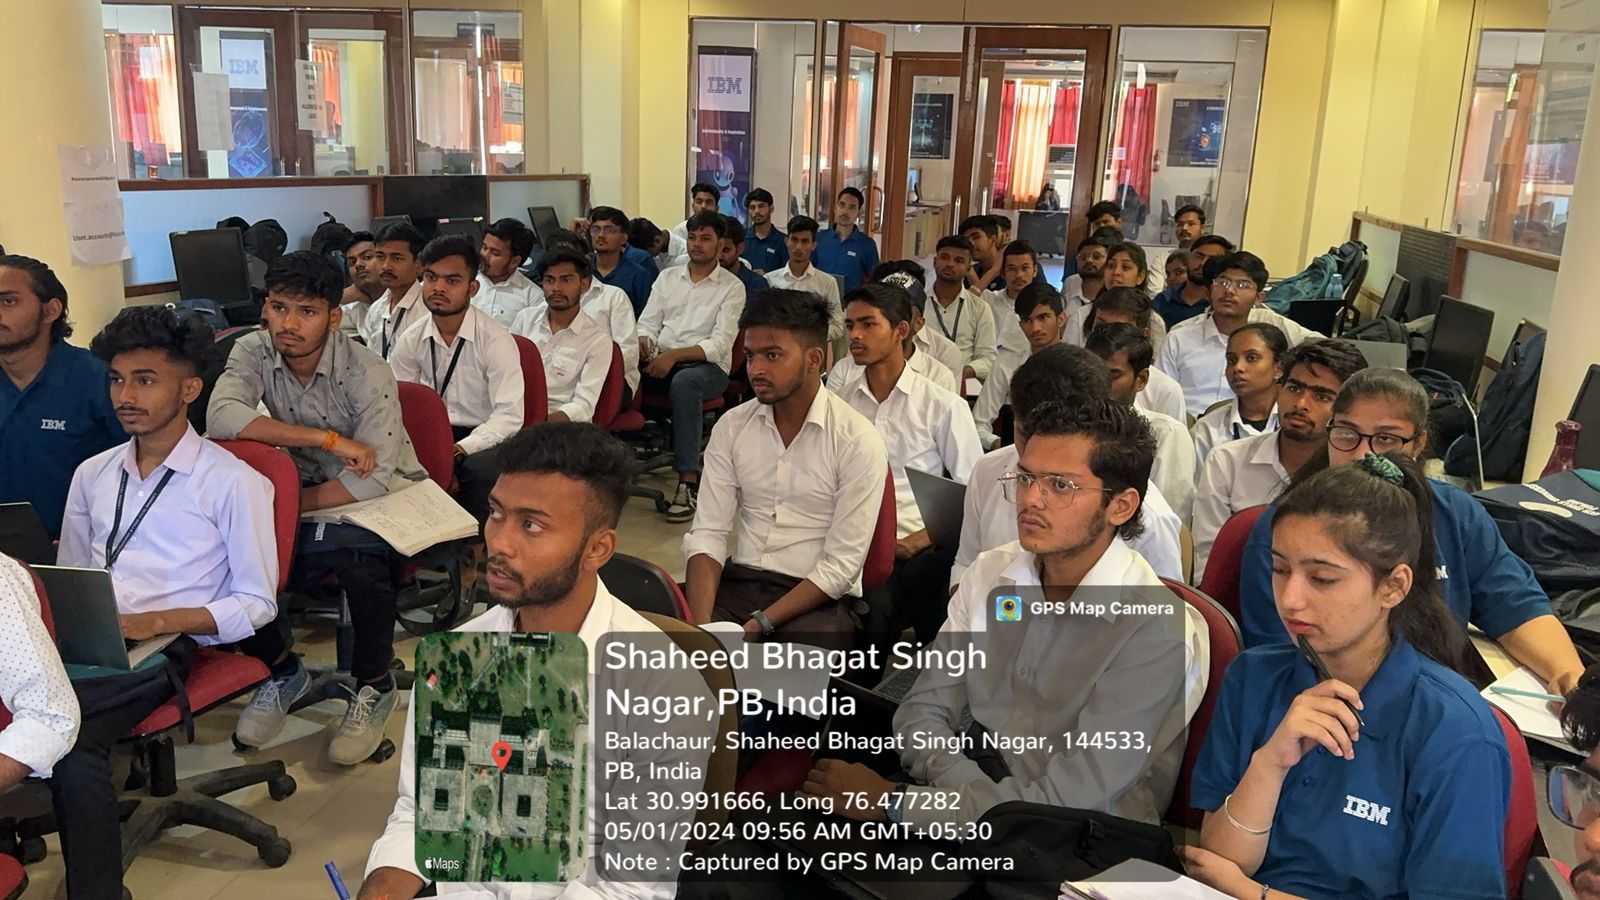 Imparting Python expertise to students